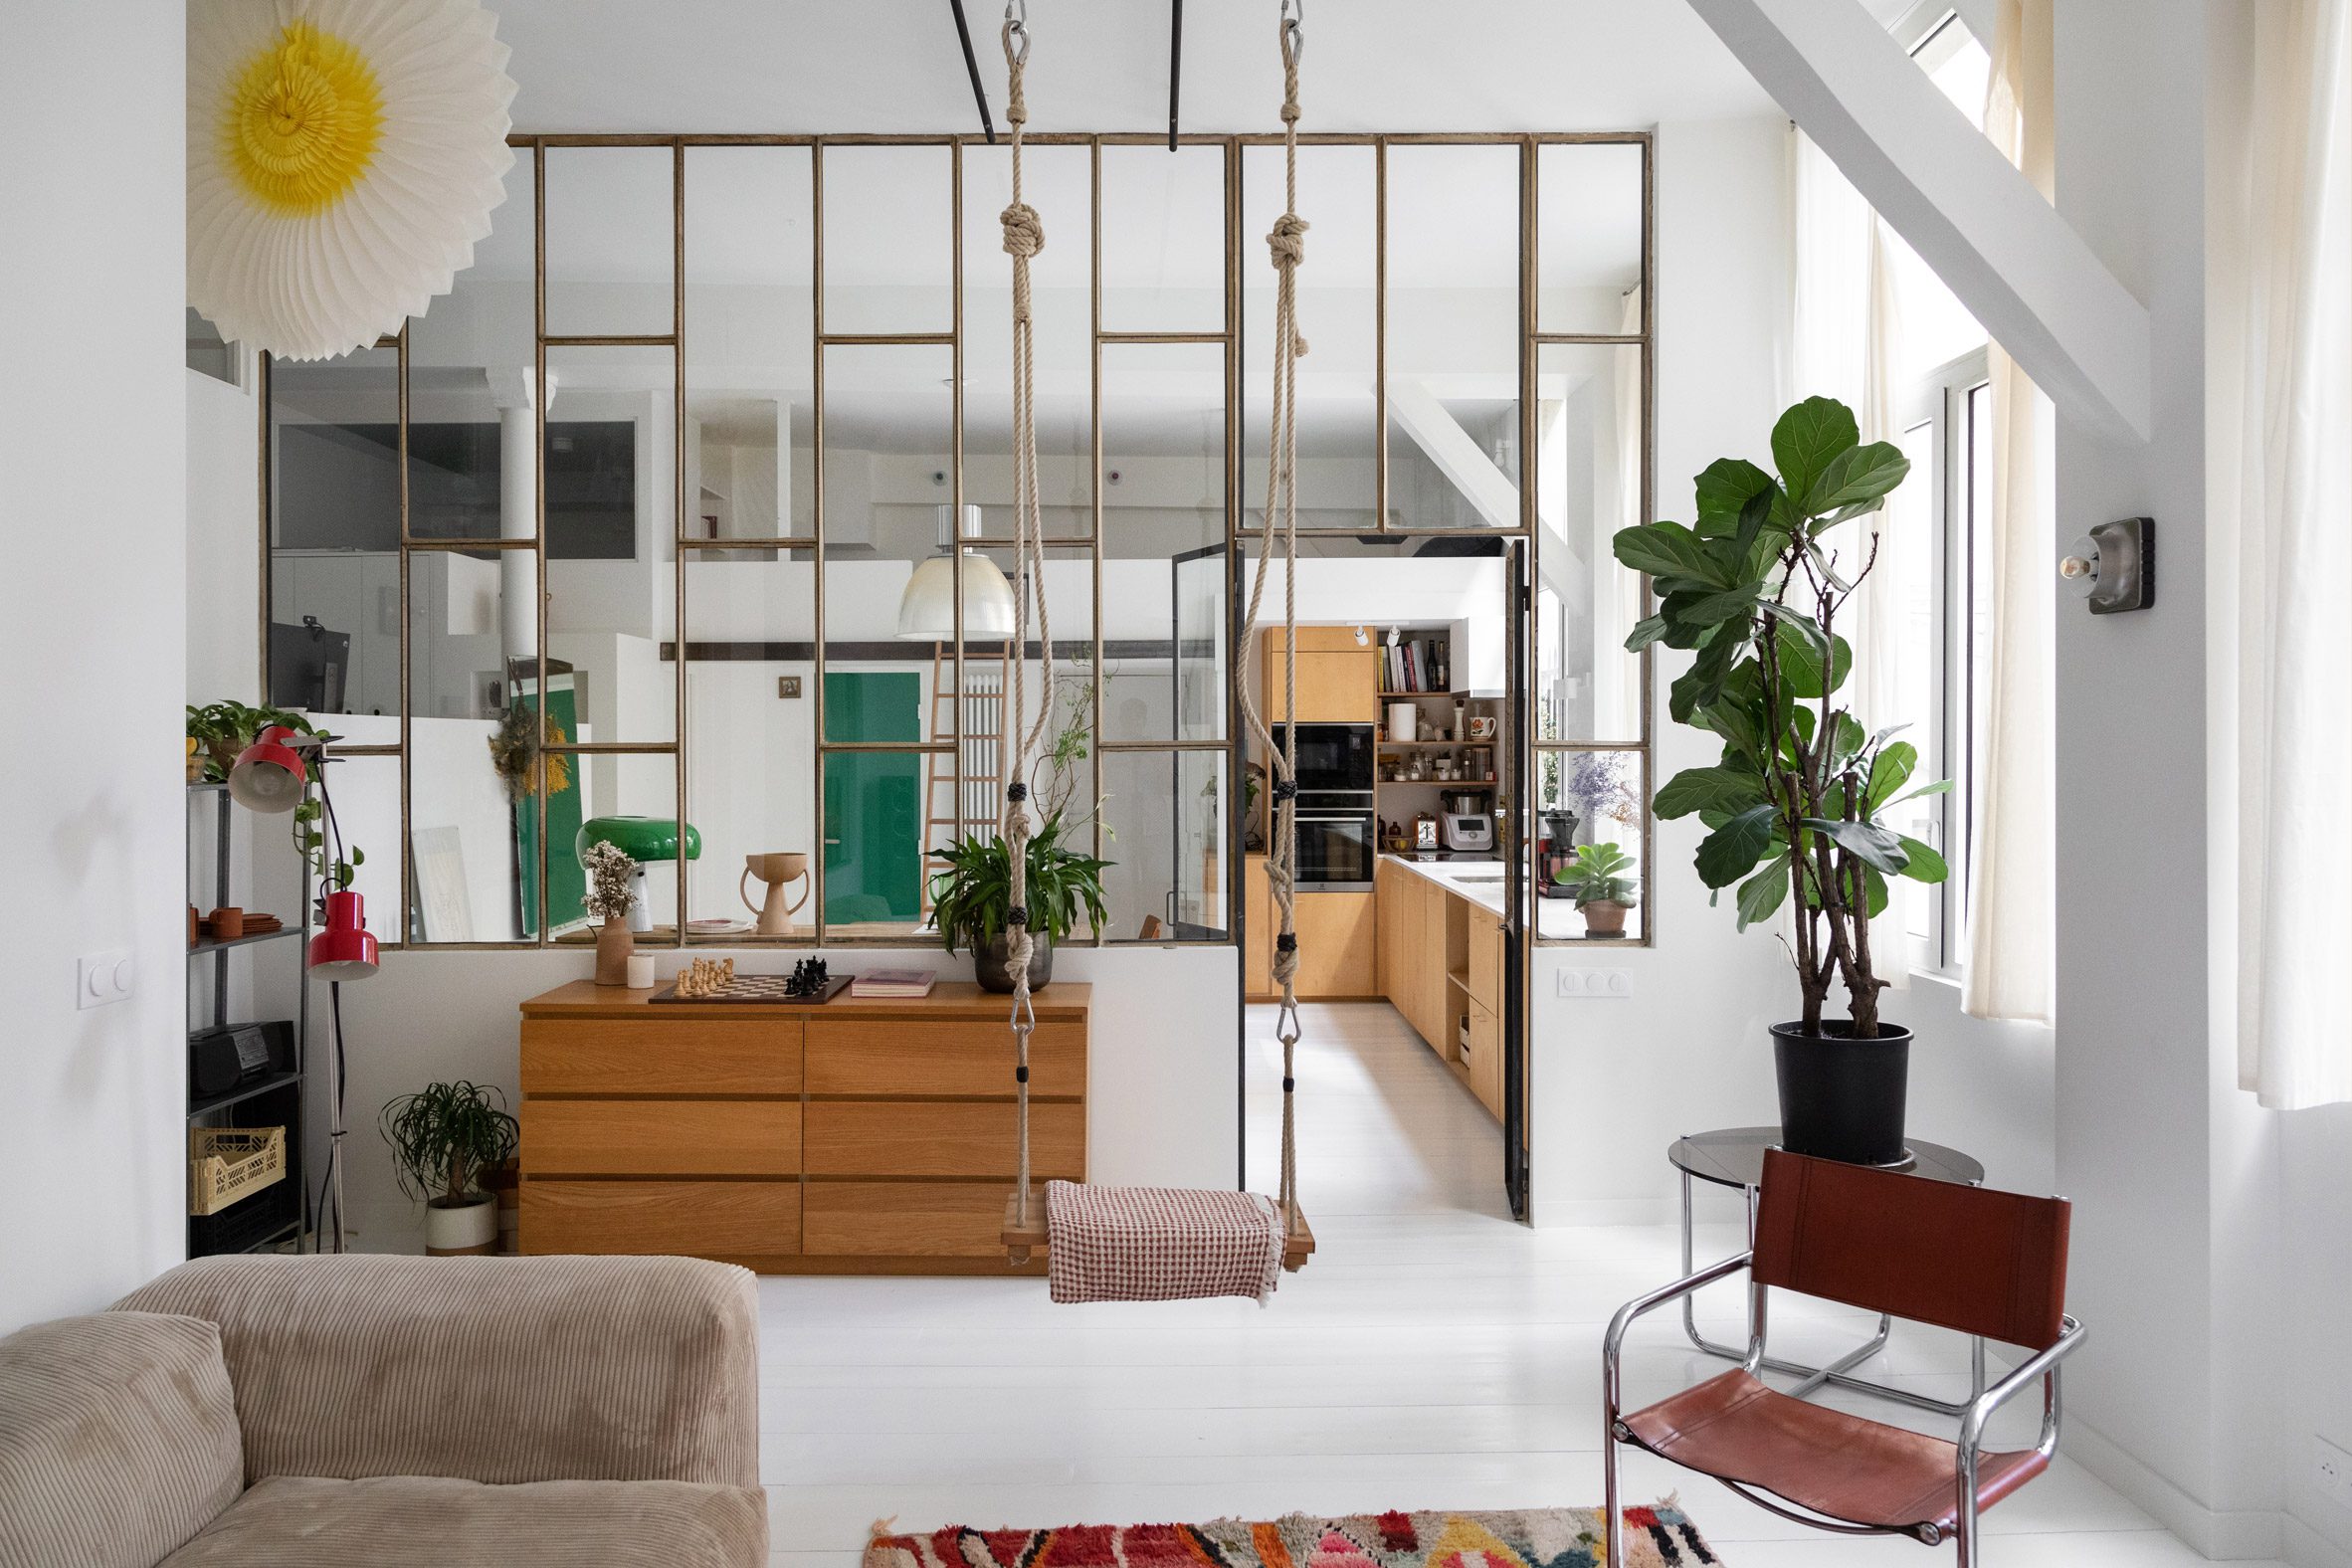 Living room in a high-ceilinged apartment with a swing hanging in it